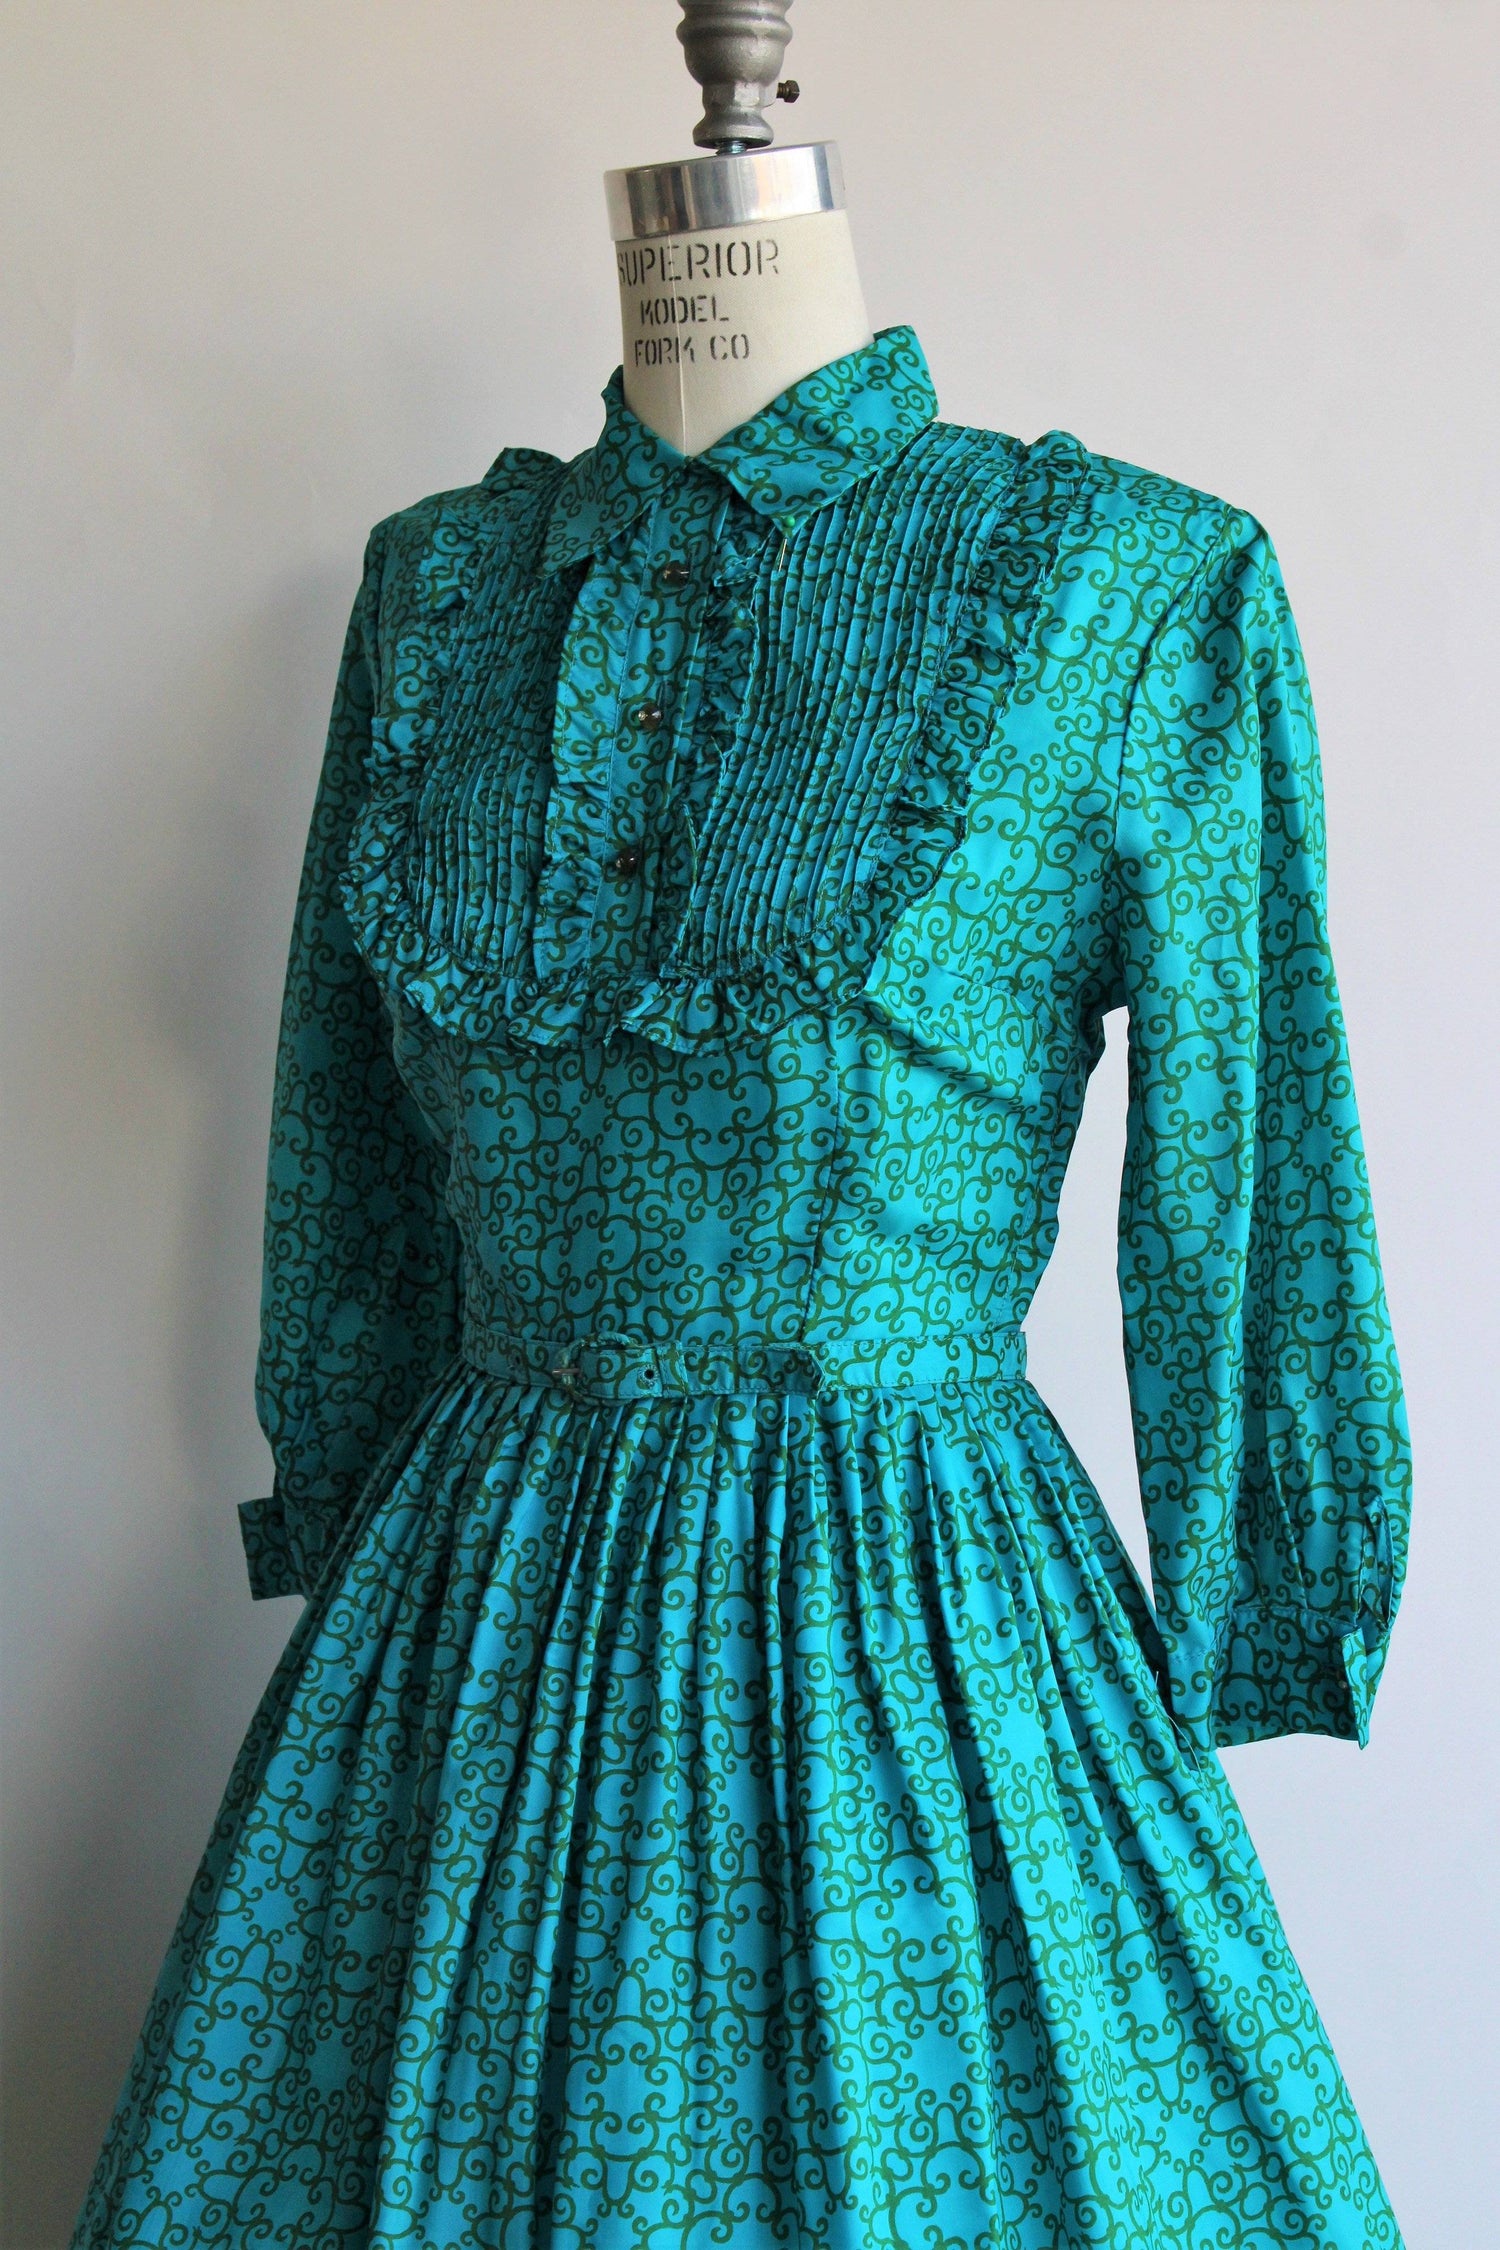 Vintage 1950s 1960s Blue and Green Dress With Belt and Tuxedo Front